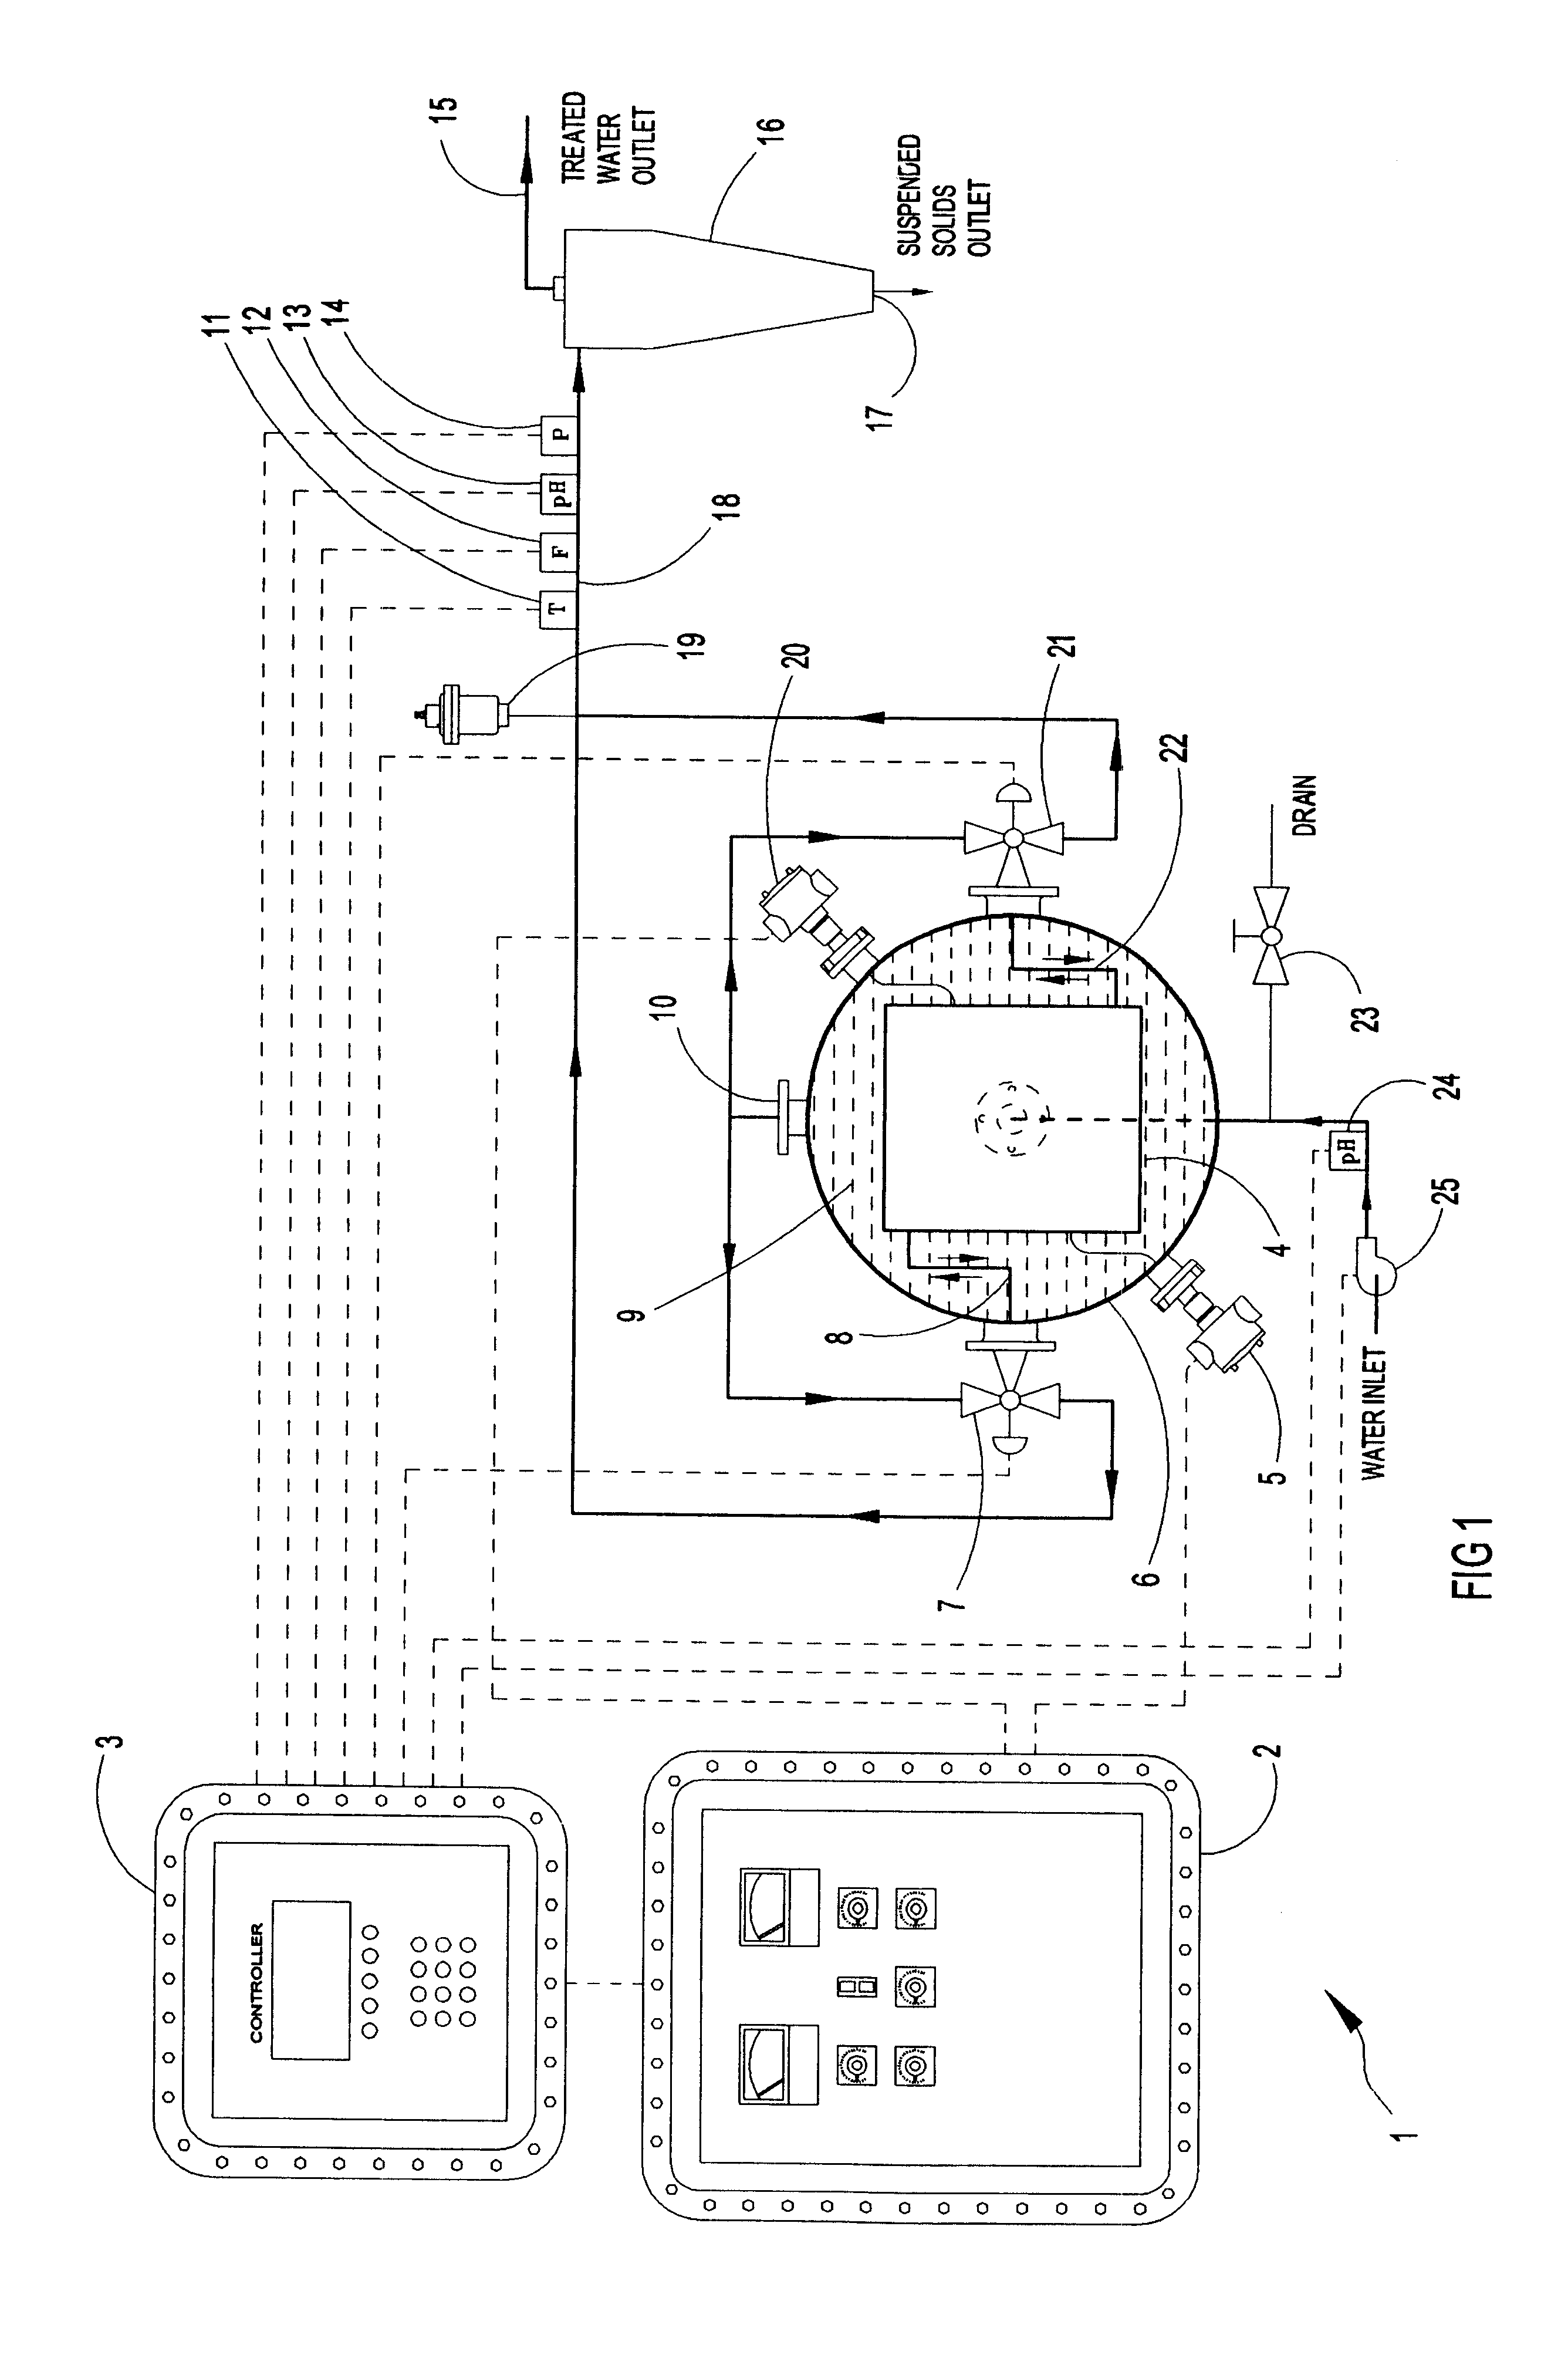 Apparatus for removing dissolved metals from wastewater by electrocoagulation